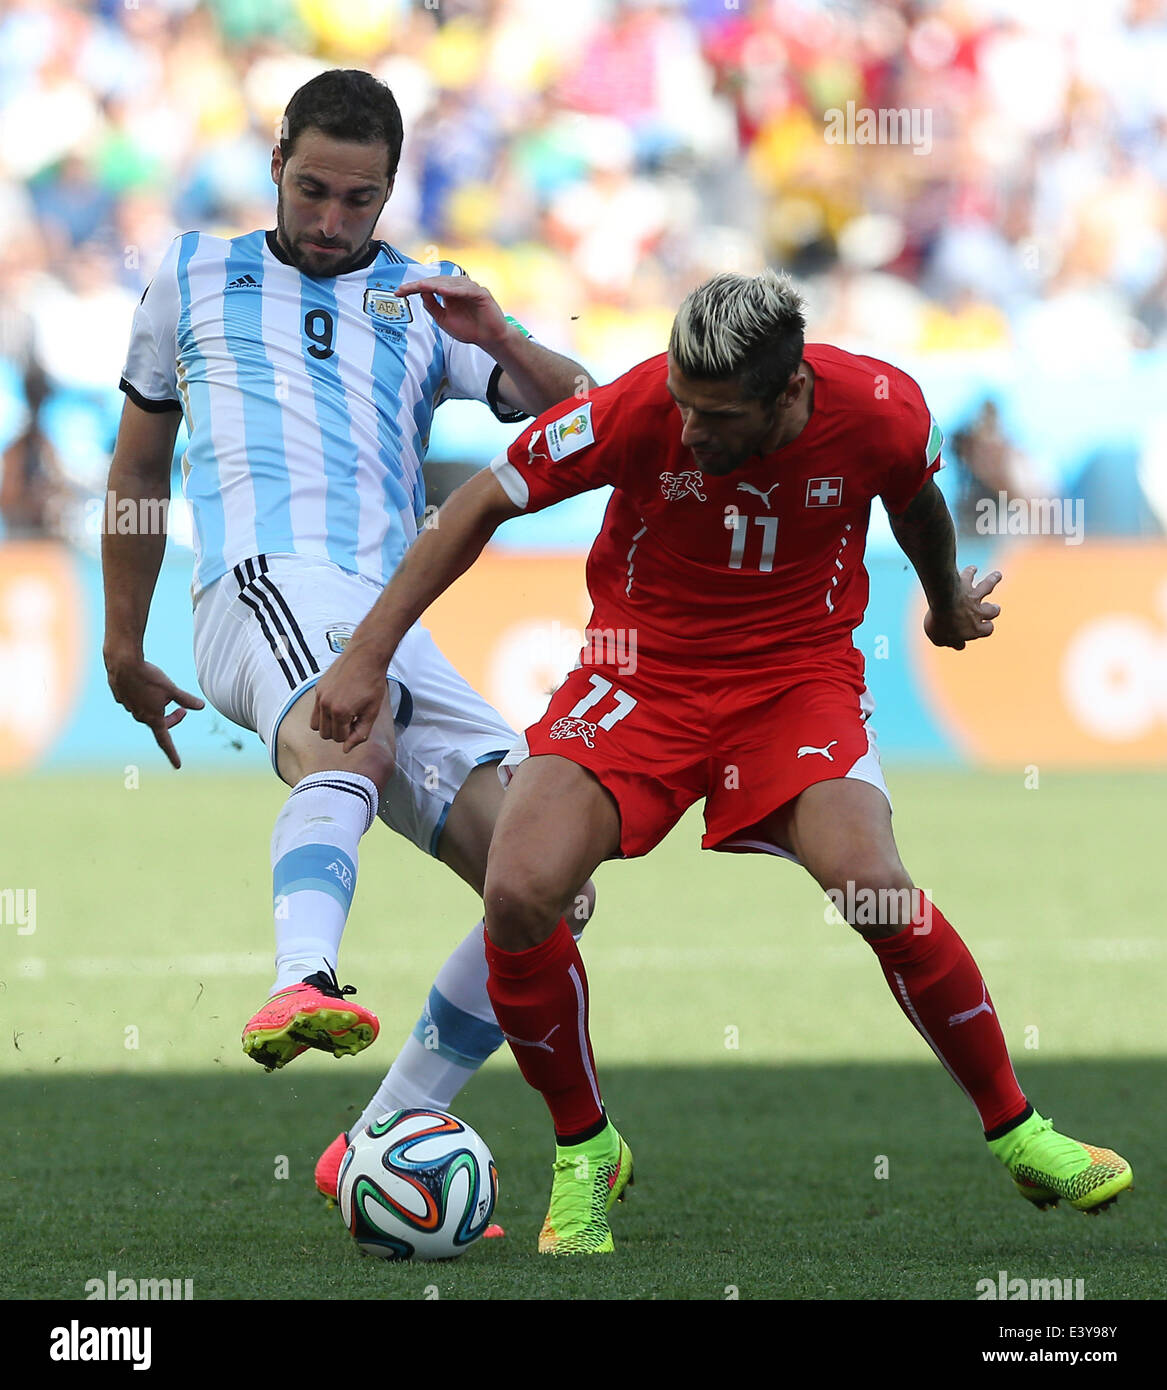 Sao Paulo, Brazil. 1st July, 2014. Argentina's Gonzalo Higuain vies with Switzerland's Valon Behrami during a Round of 16 match between Argentina and Switzerland of 2014 FIFA World Cup at the Arena de Sao Paulo Stadium in Sao Paulo, Brazil, on July 1, 2014. Credit:  Xu Zijian/Xinhua/Alamy Live News Stock Photo